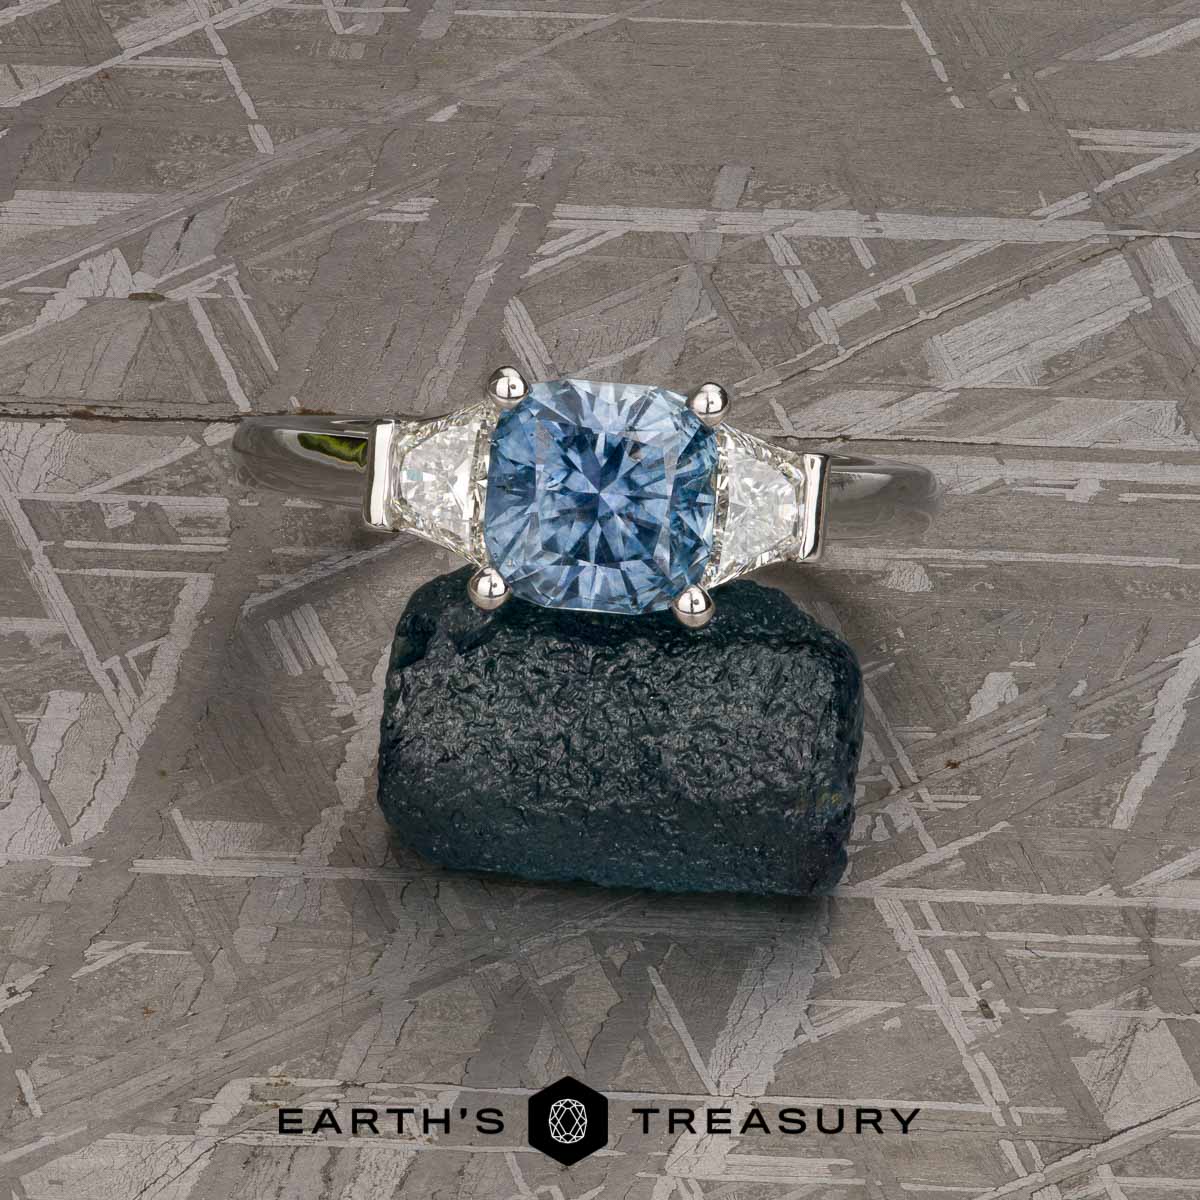 The "Cyanea" in platinum with 2.19-carat Montana sapphire